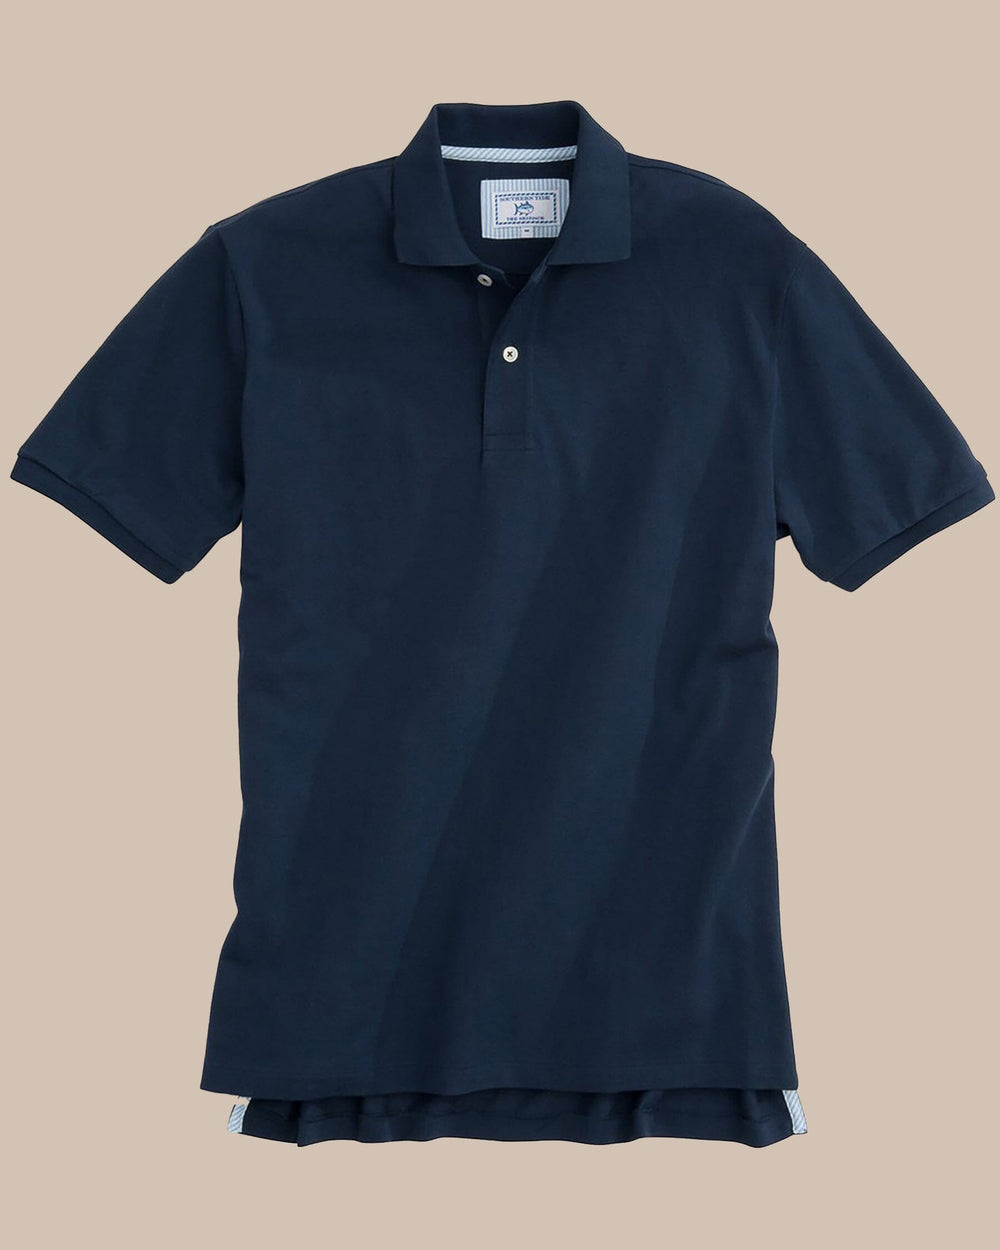 The front view of the Men's Orange Skipjack Gameday Colors Polo Shirt by Southern Tide - Navy